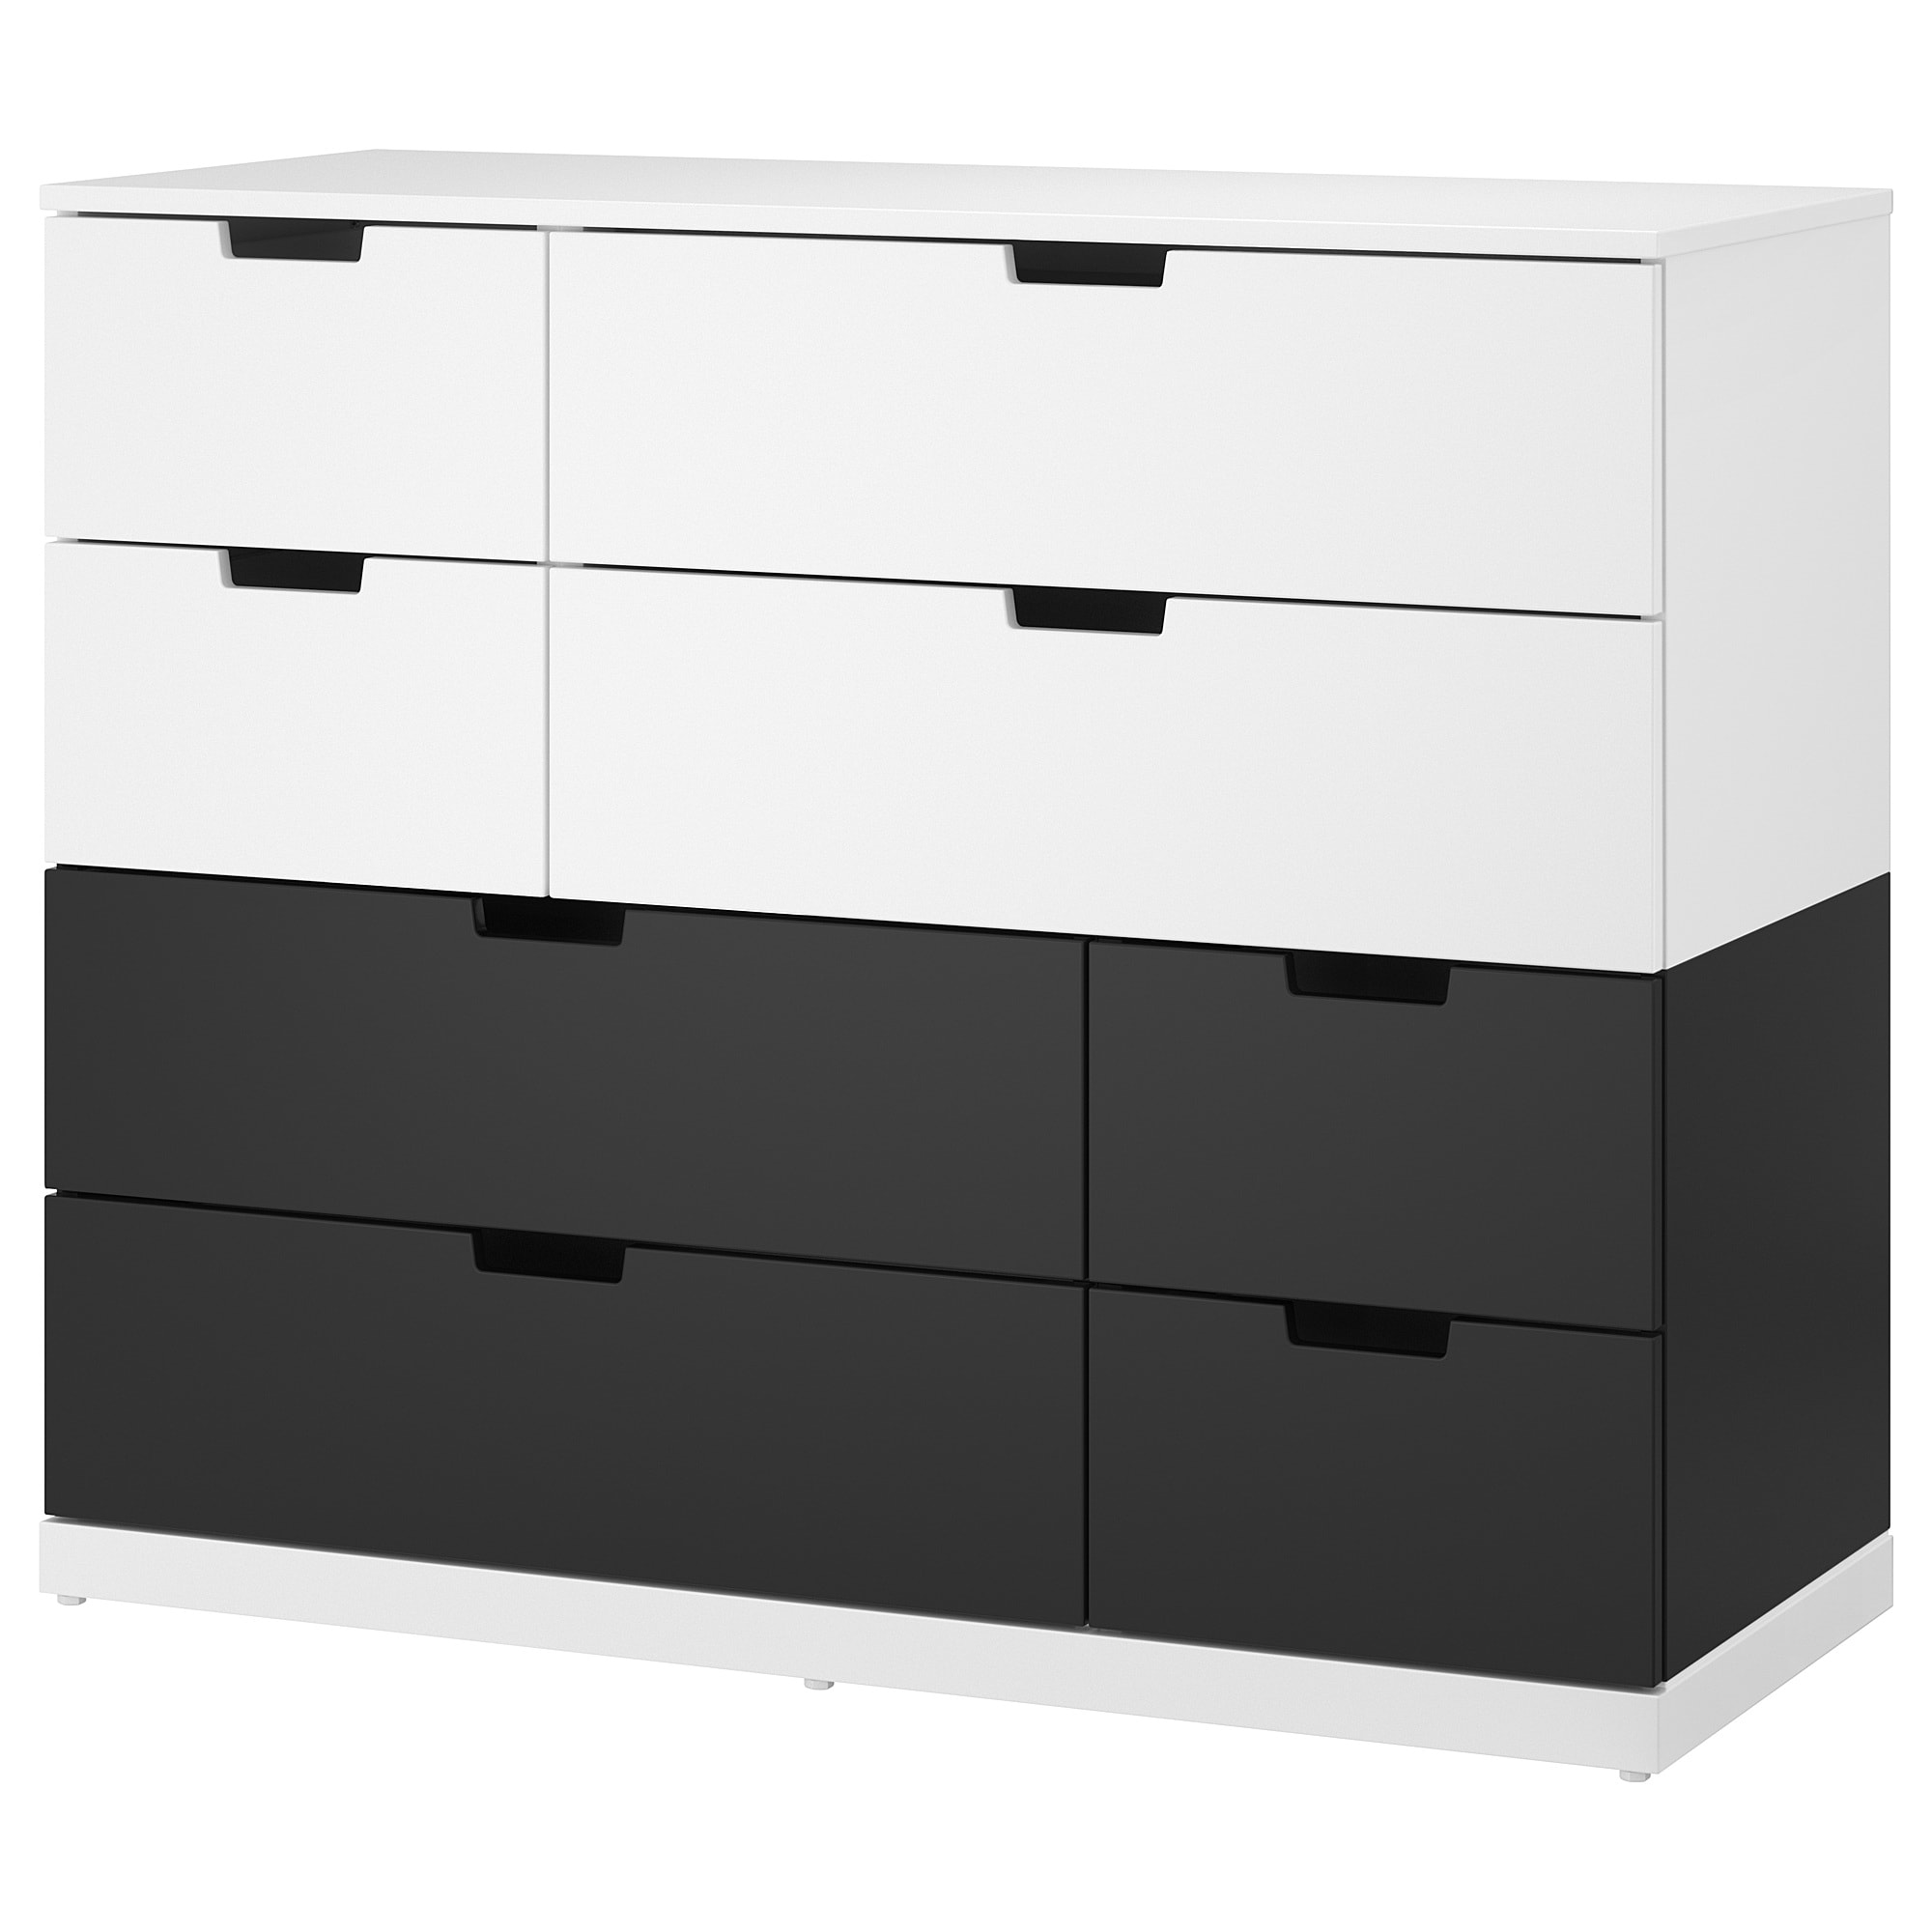 79211764 Nordli Chests of Drawers IKEA khmer in phnom penh cambodia